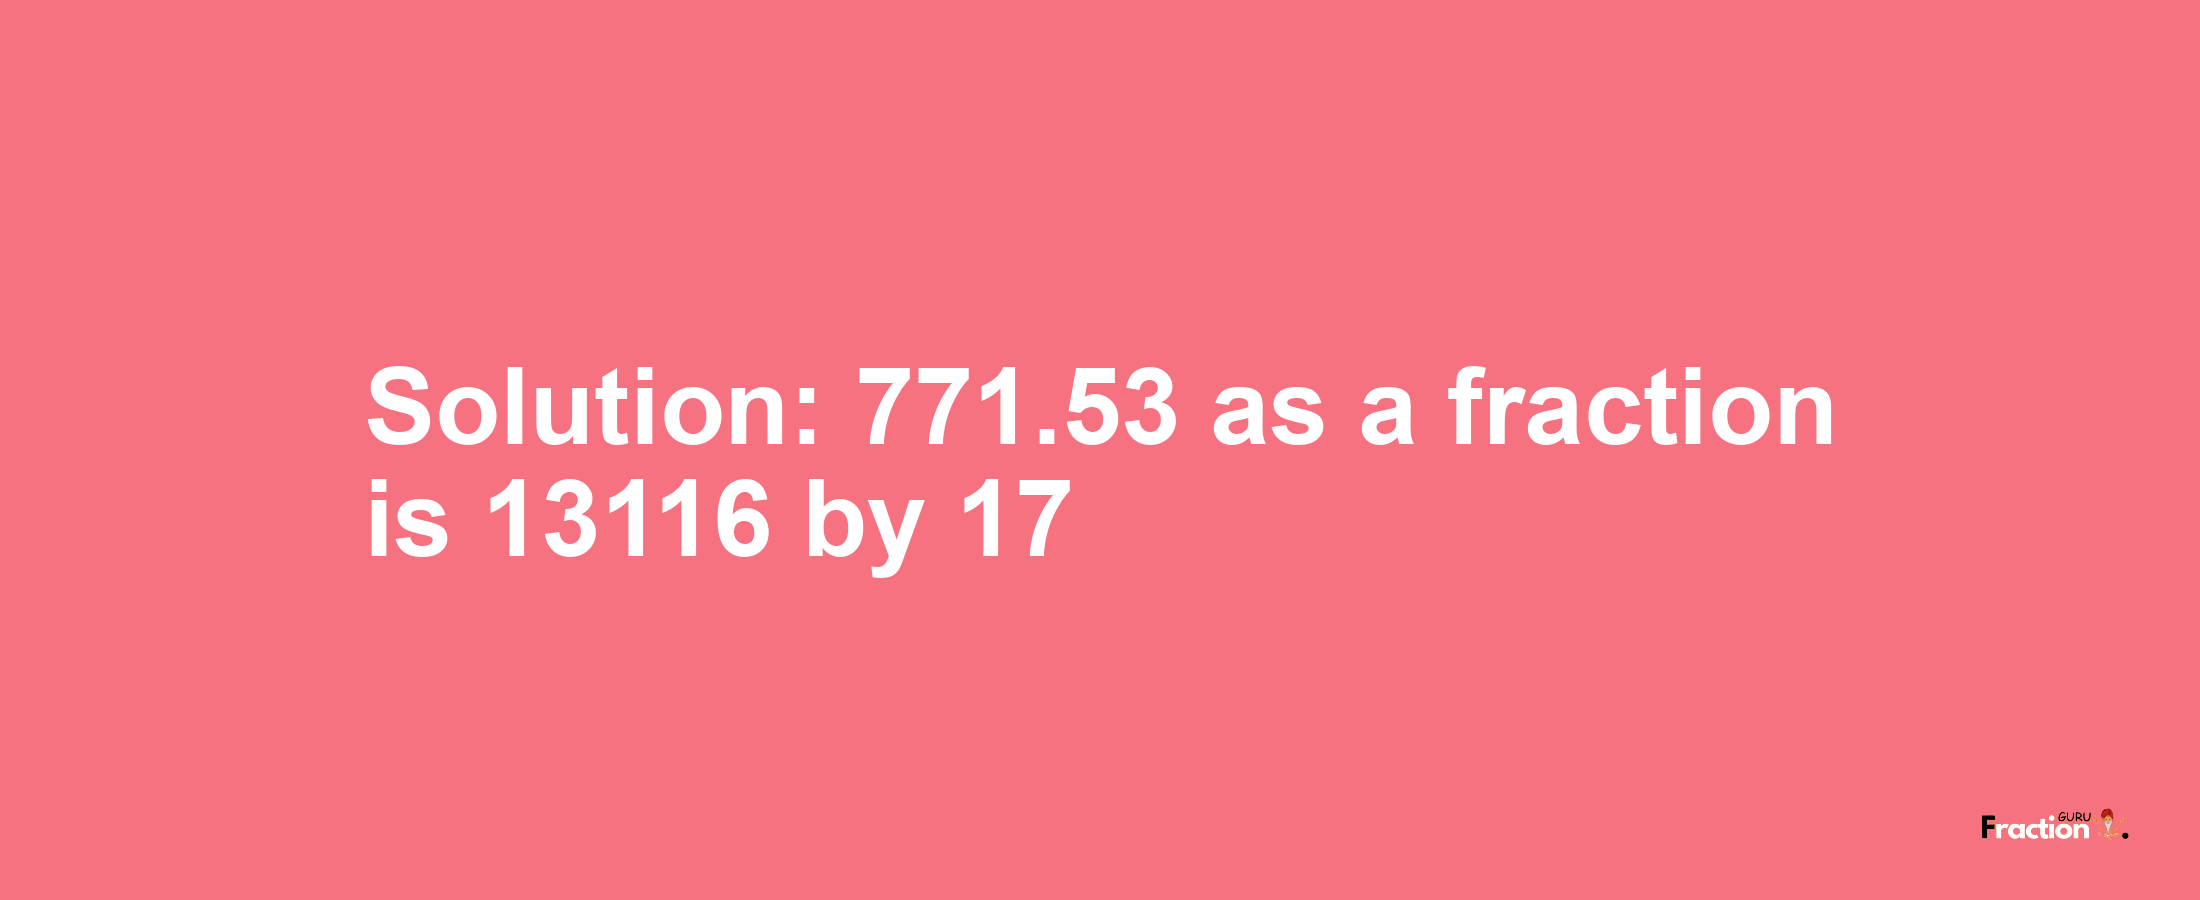 Solution:771.53 as a fraction is 13116/17